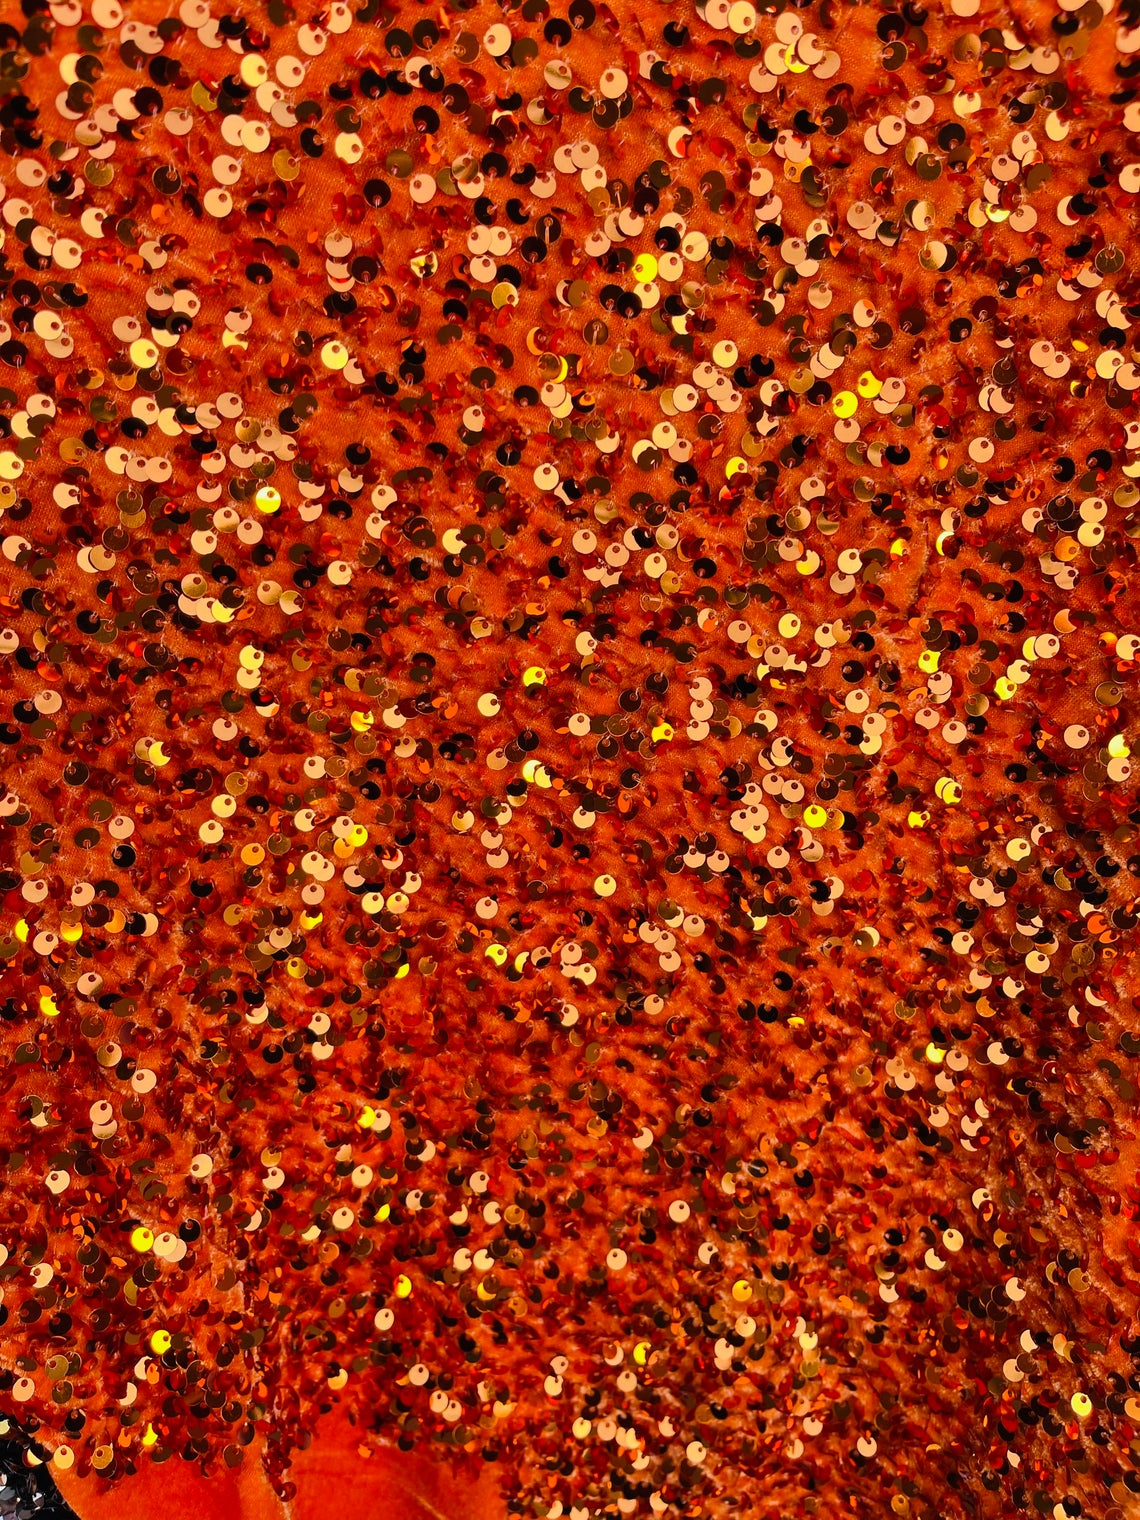 Red Sequin Velvet Fabric. Red All Over Sequin on Stretch Velvet Fabric,  Stretch Sequin Fabric by Yard BEST PRICE 